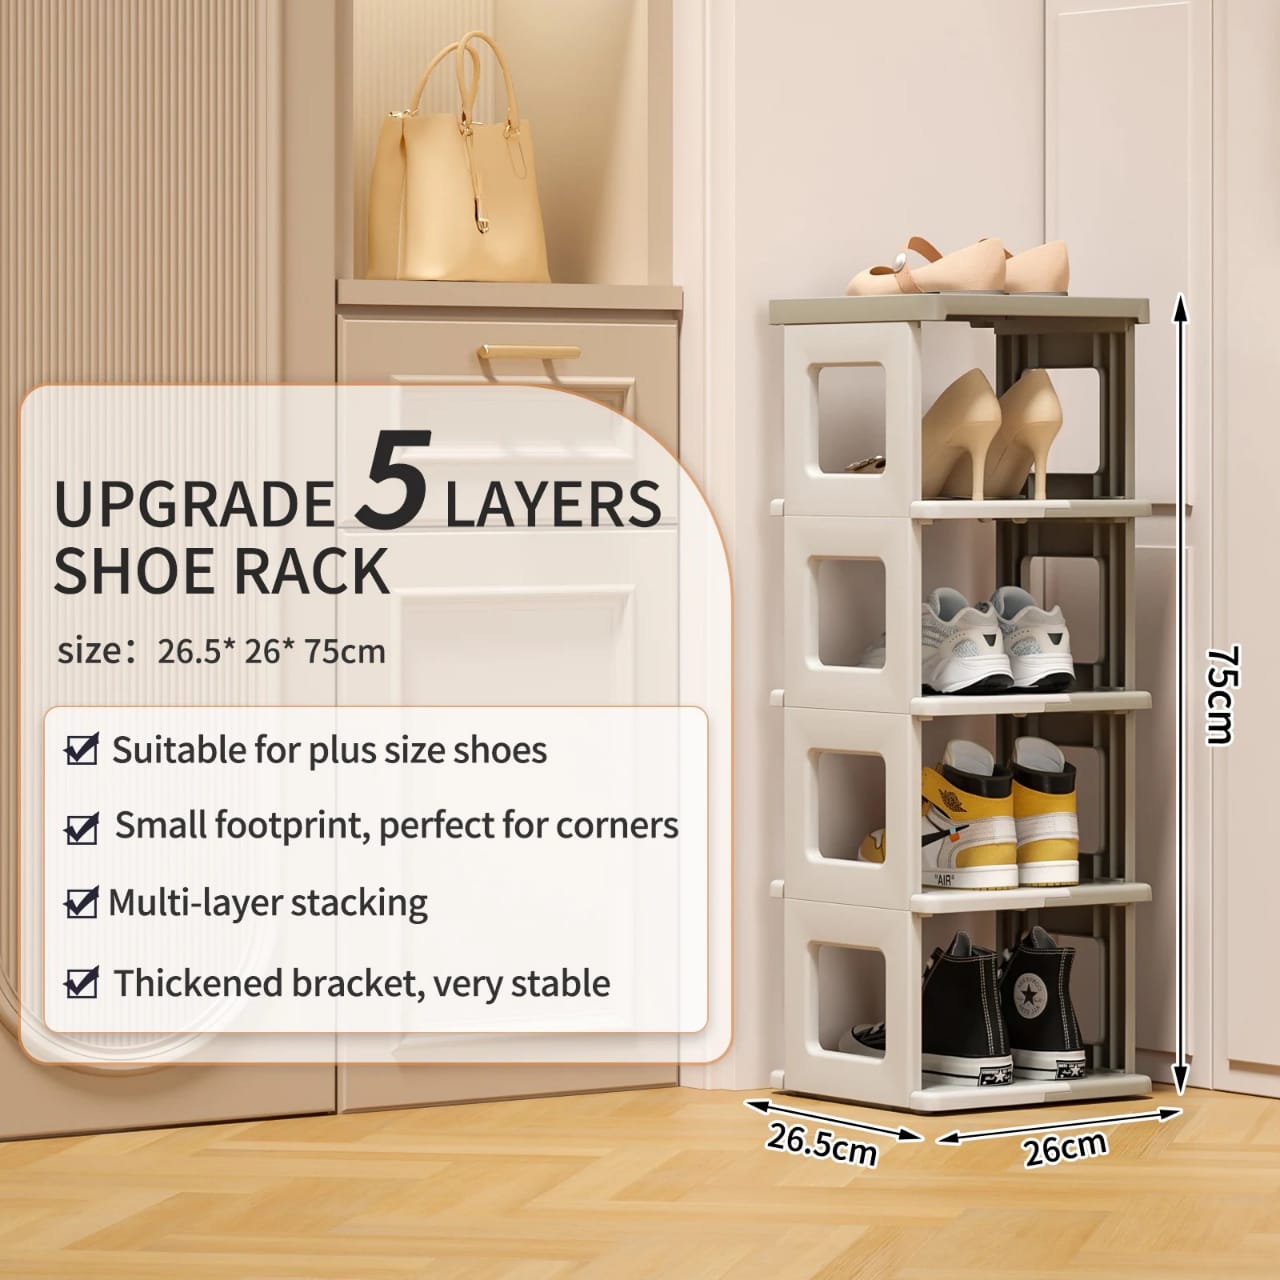 Shoes and Bags are Arranged on a 5 Layer Foldable Shoe Rack Shelf.